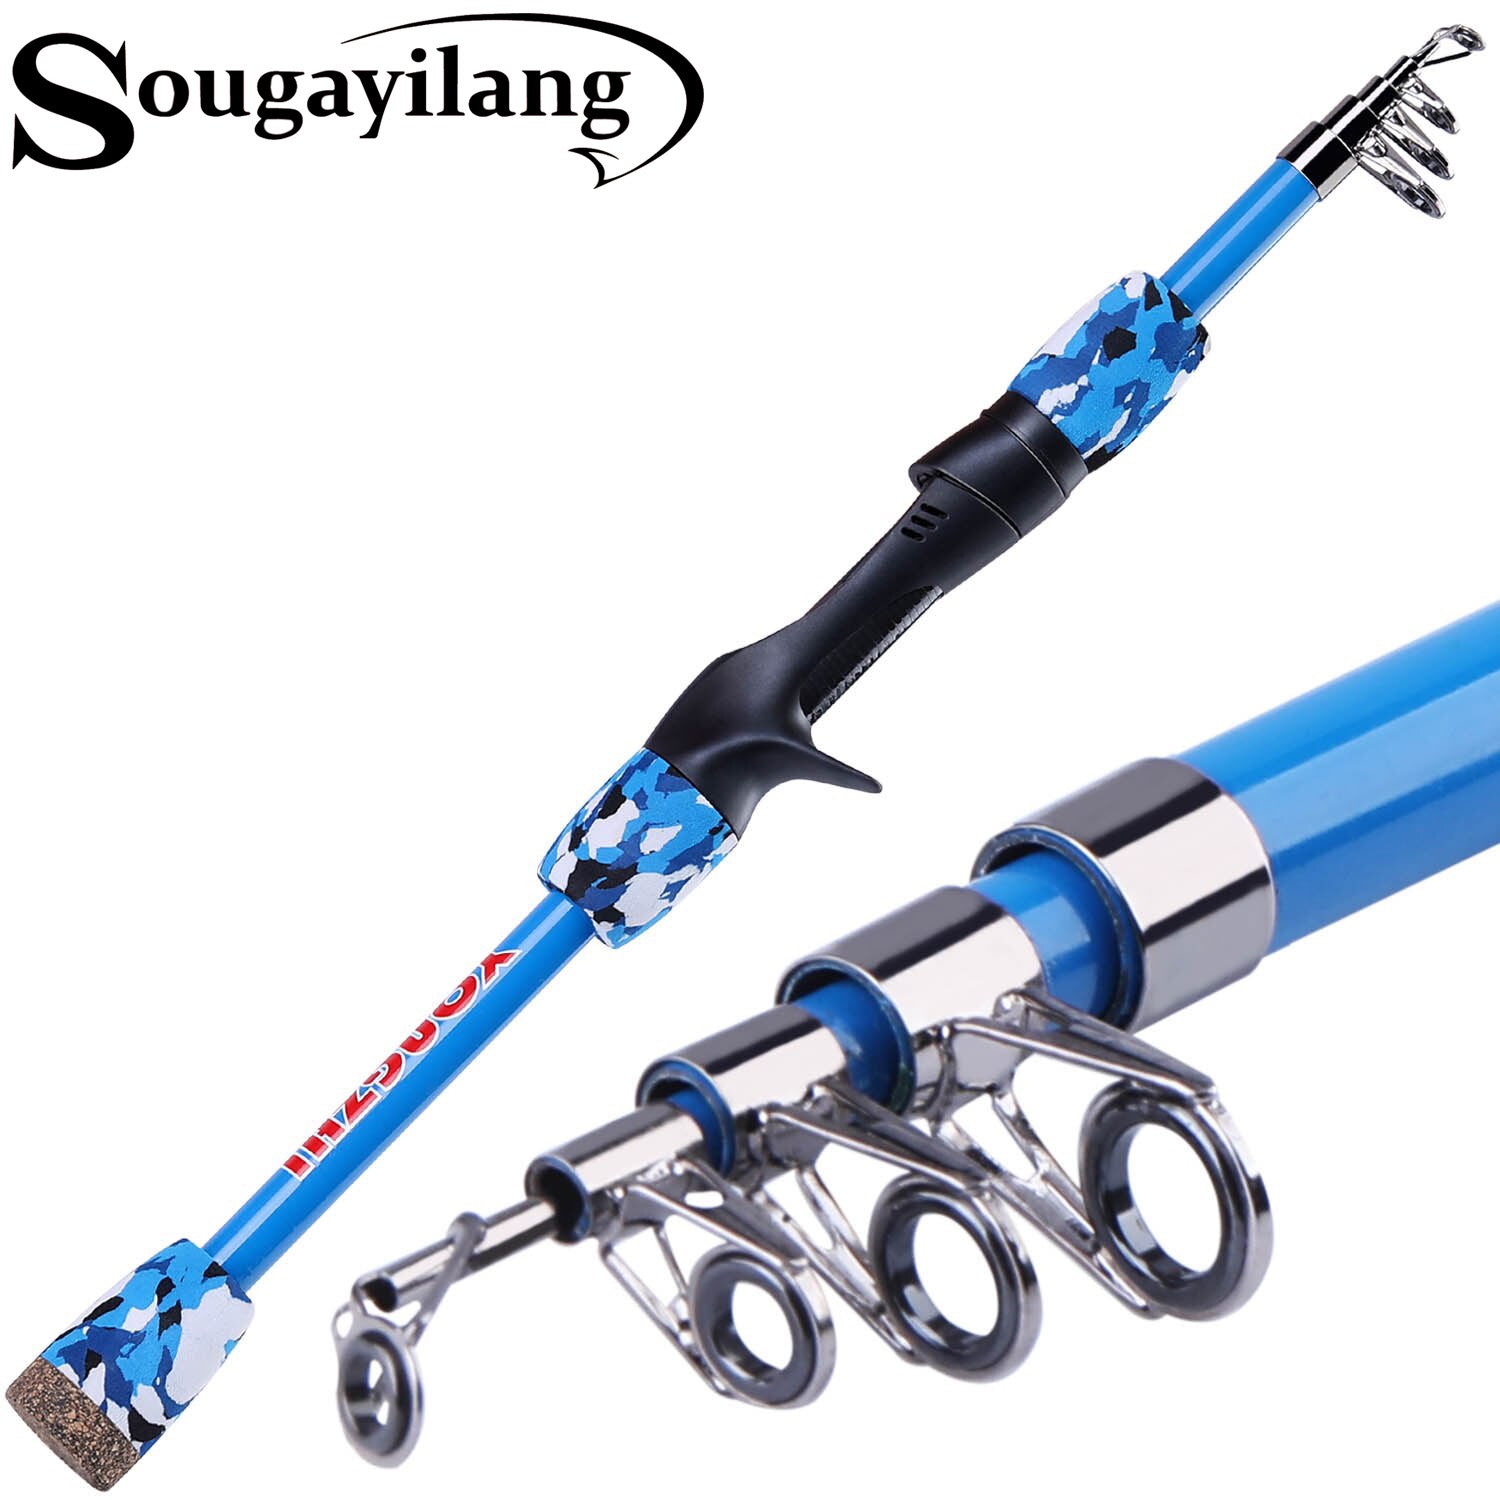 Sougayilang 1.5m Telescopic Fishing Rod Proable Travel Rods for Spinn